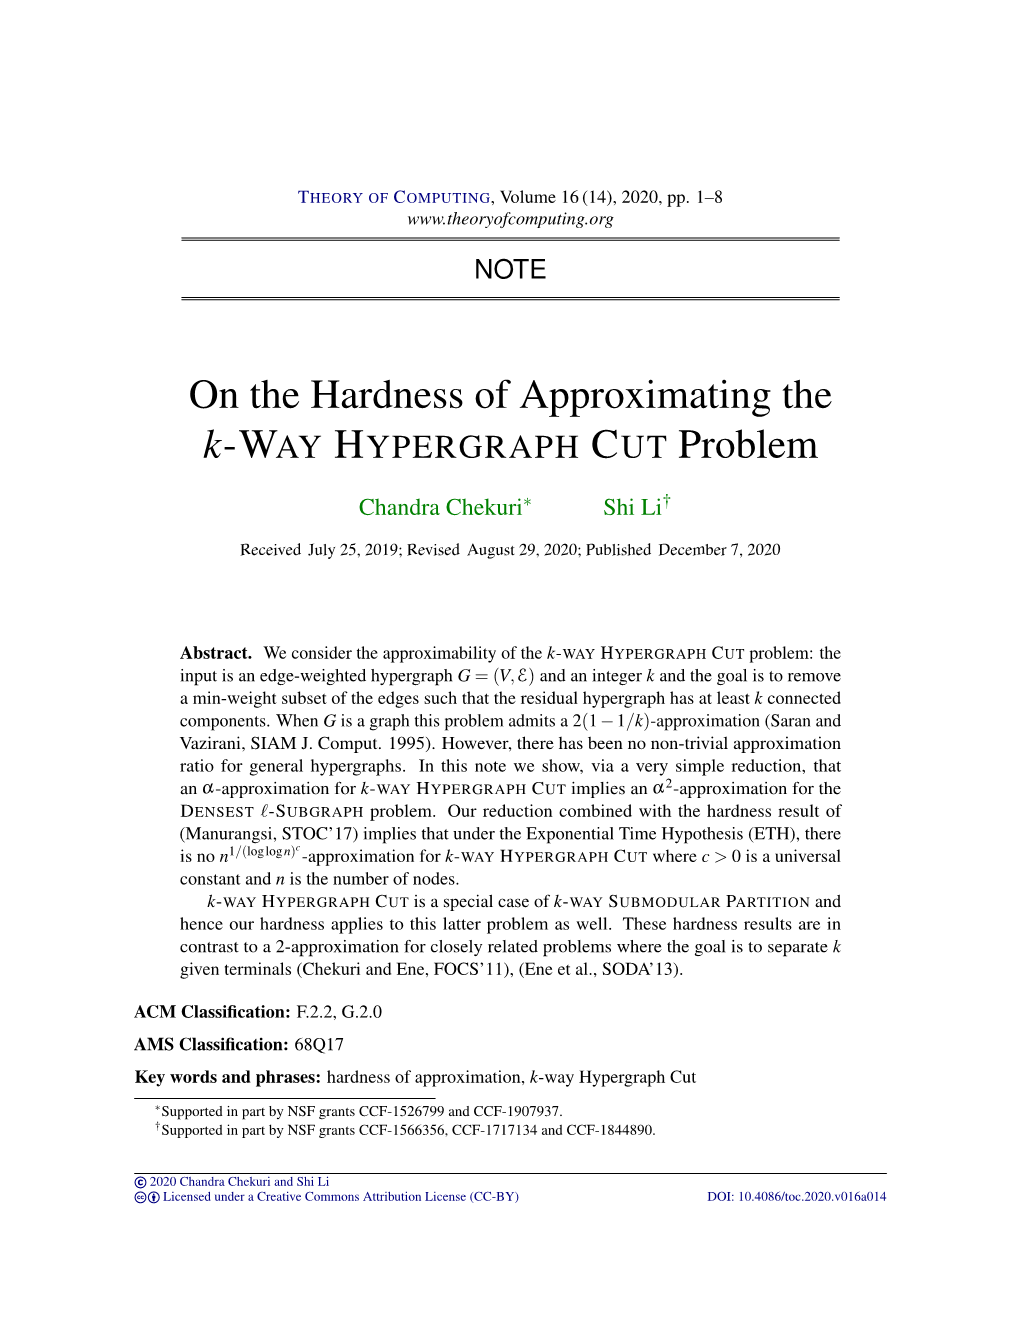 On the Hardness of Approximating the K-WAY HYPERGRAPH CUT Problem